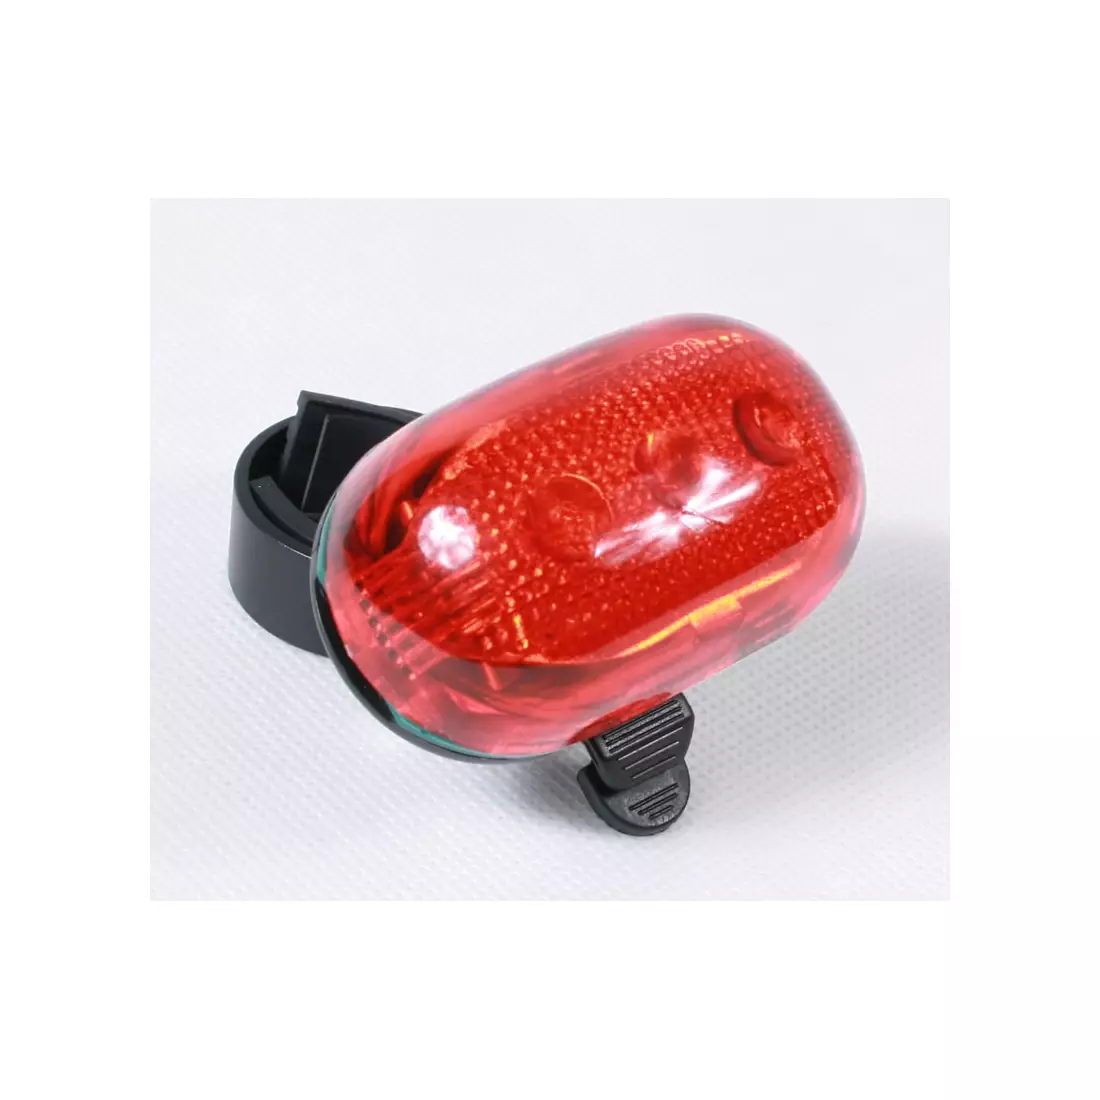 JY603 rear bicycle light - color: Red